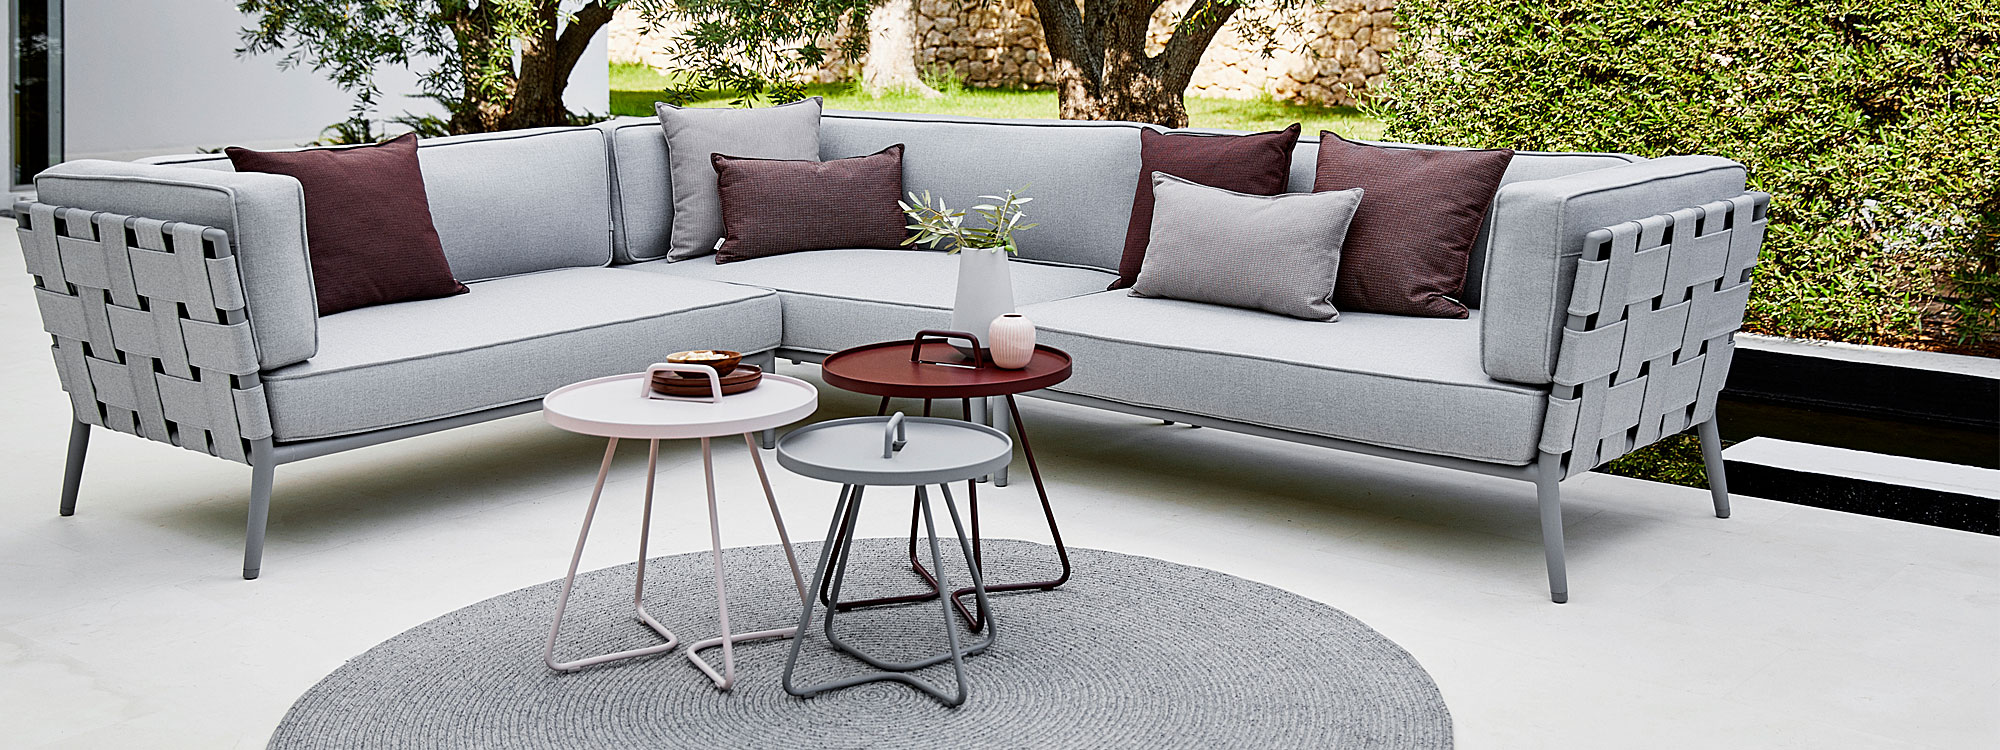 Image of grey and burgundy On The Move tray tables and grey Core garden sofa by Cane-line